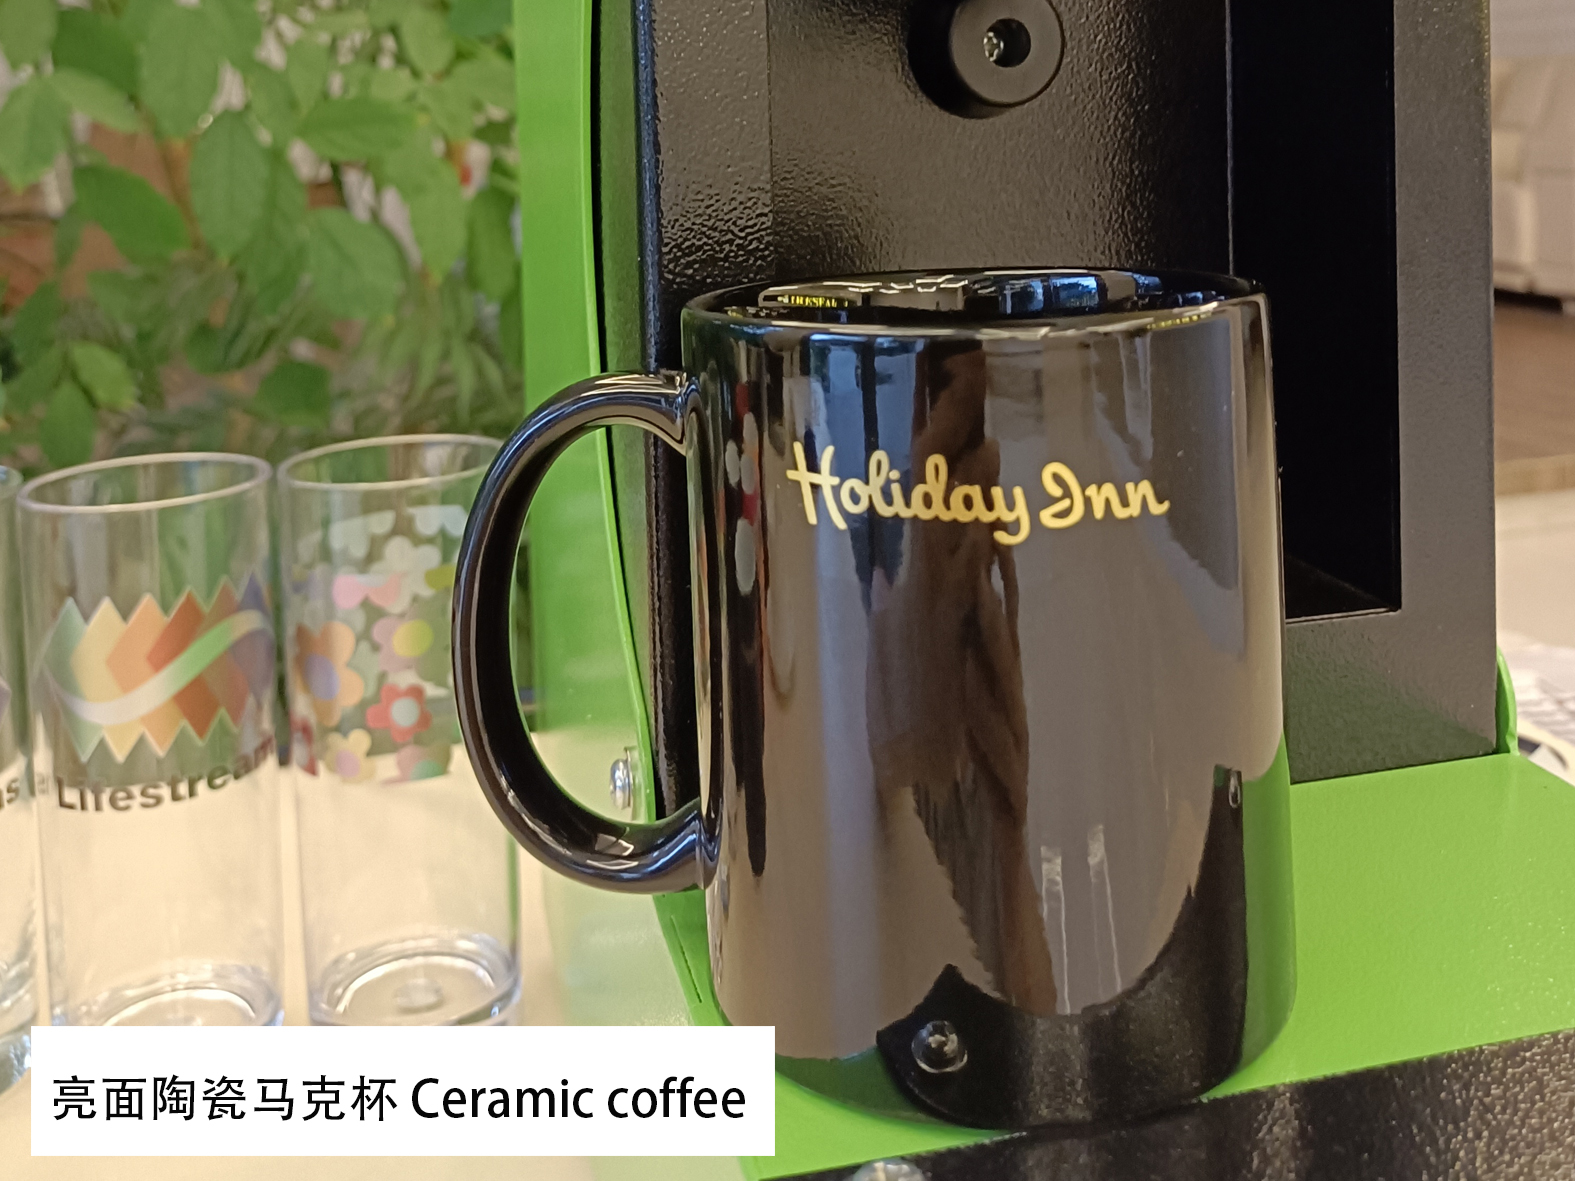 Brilliant Golden cuttable Heat Transfer Decals Foil (HSF-GD811) For Ceramic Coffee of Holiday Inn Logo